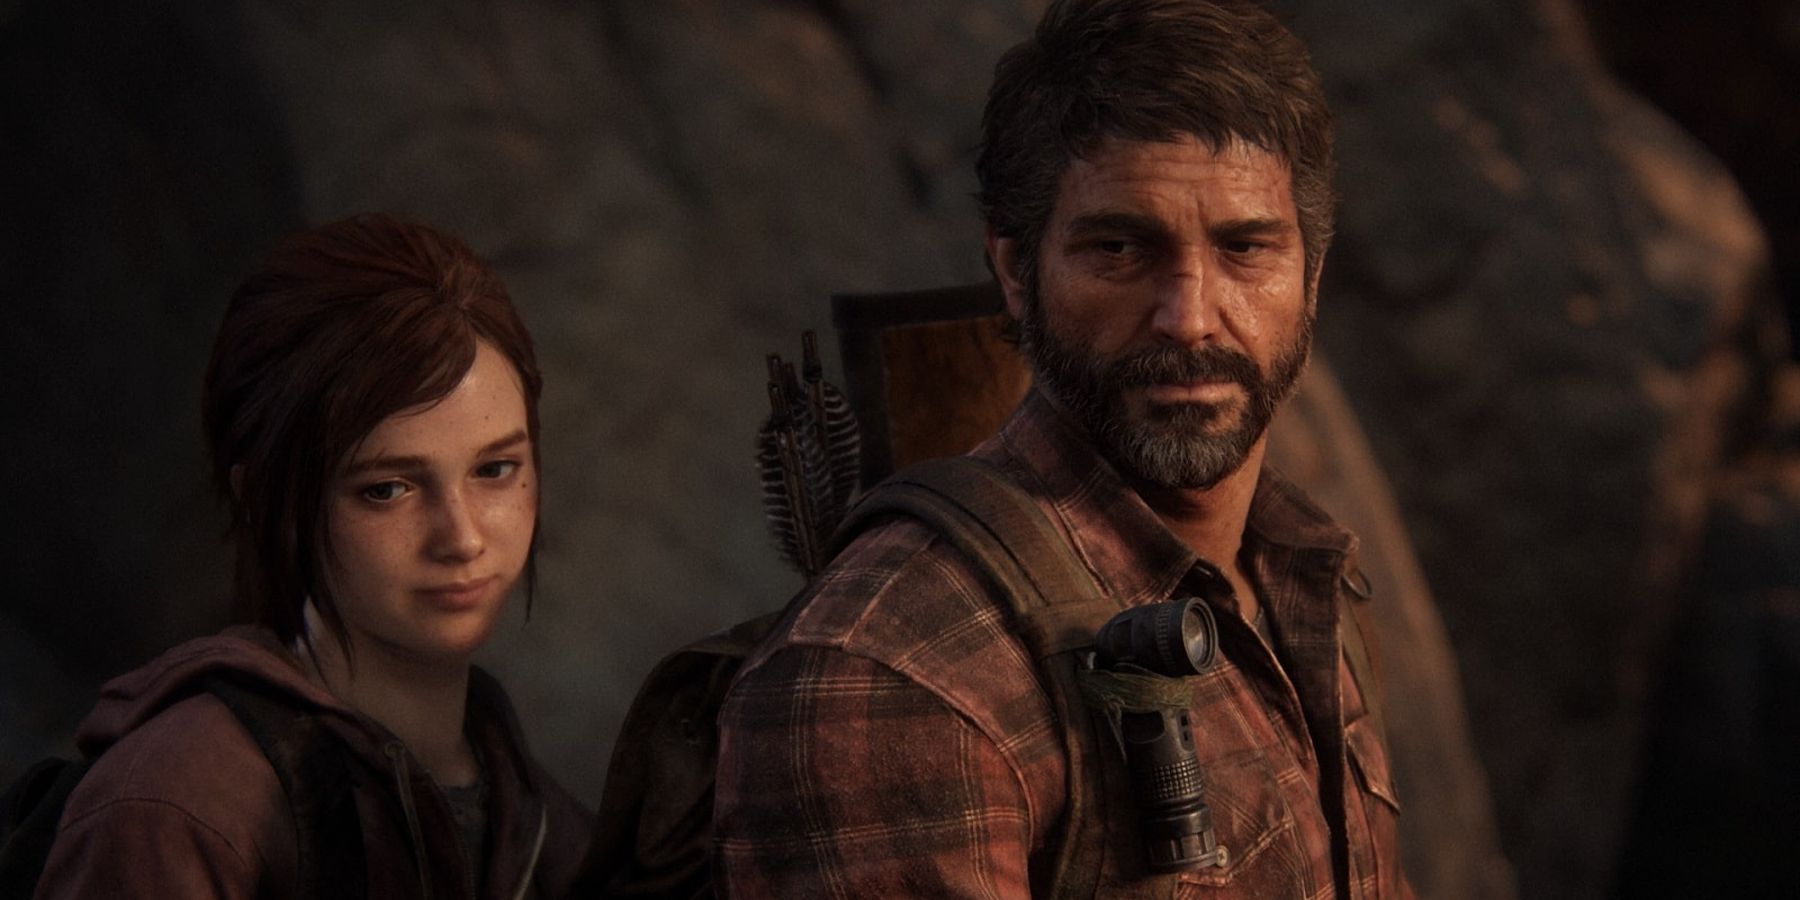 joel and ellie looking disappointed